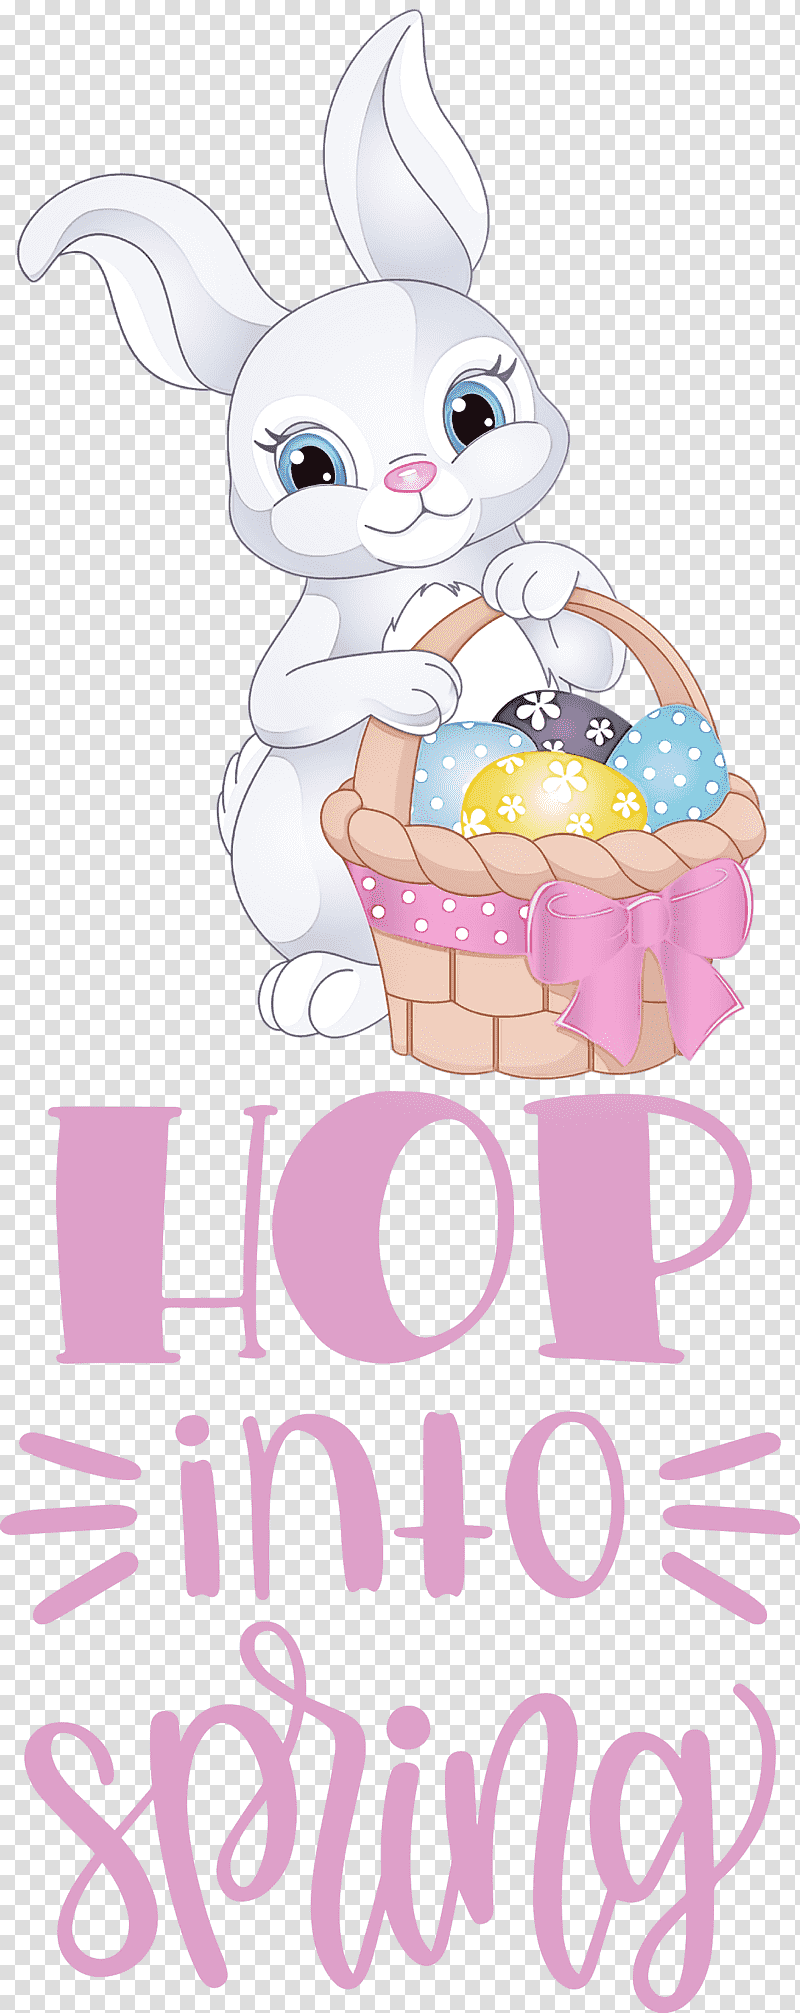 Hop Into Spring Happy Easter Easter Day, Hare, Easter Bunny, Cartoon, Easter Egg, Tipi, Text transparent background PNG clipart